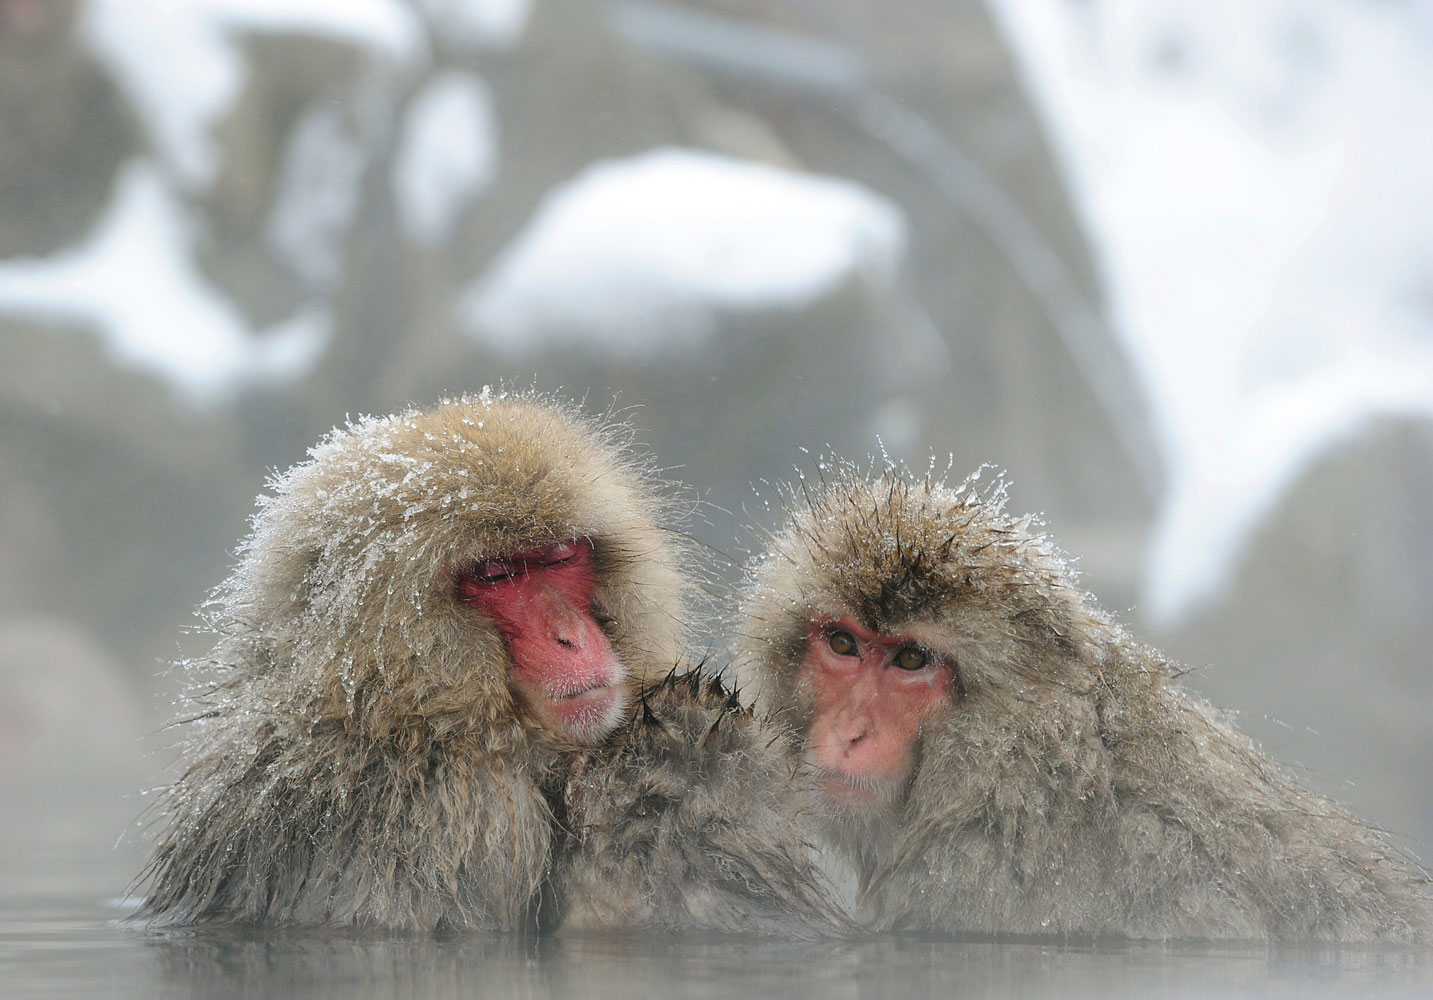 Japanese macaque monkeys, known as "snow monkeys," take an open-air hot spring bath at the Jigokudani Monkey Park in the town of Yamanouchi, Nagano prefecture on Jan. 19, 2014.